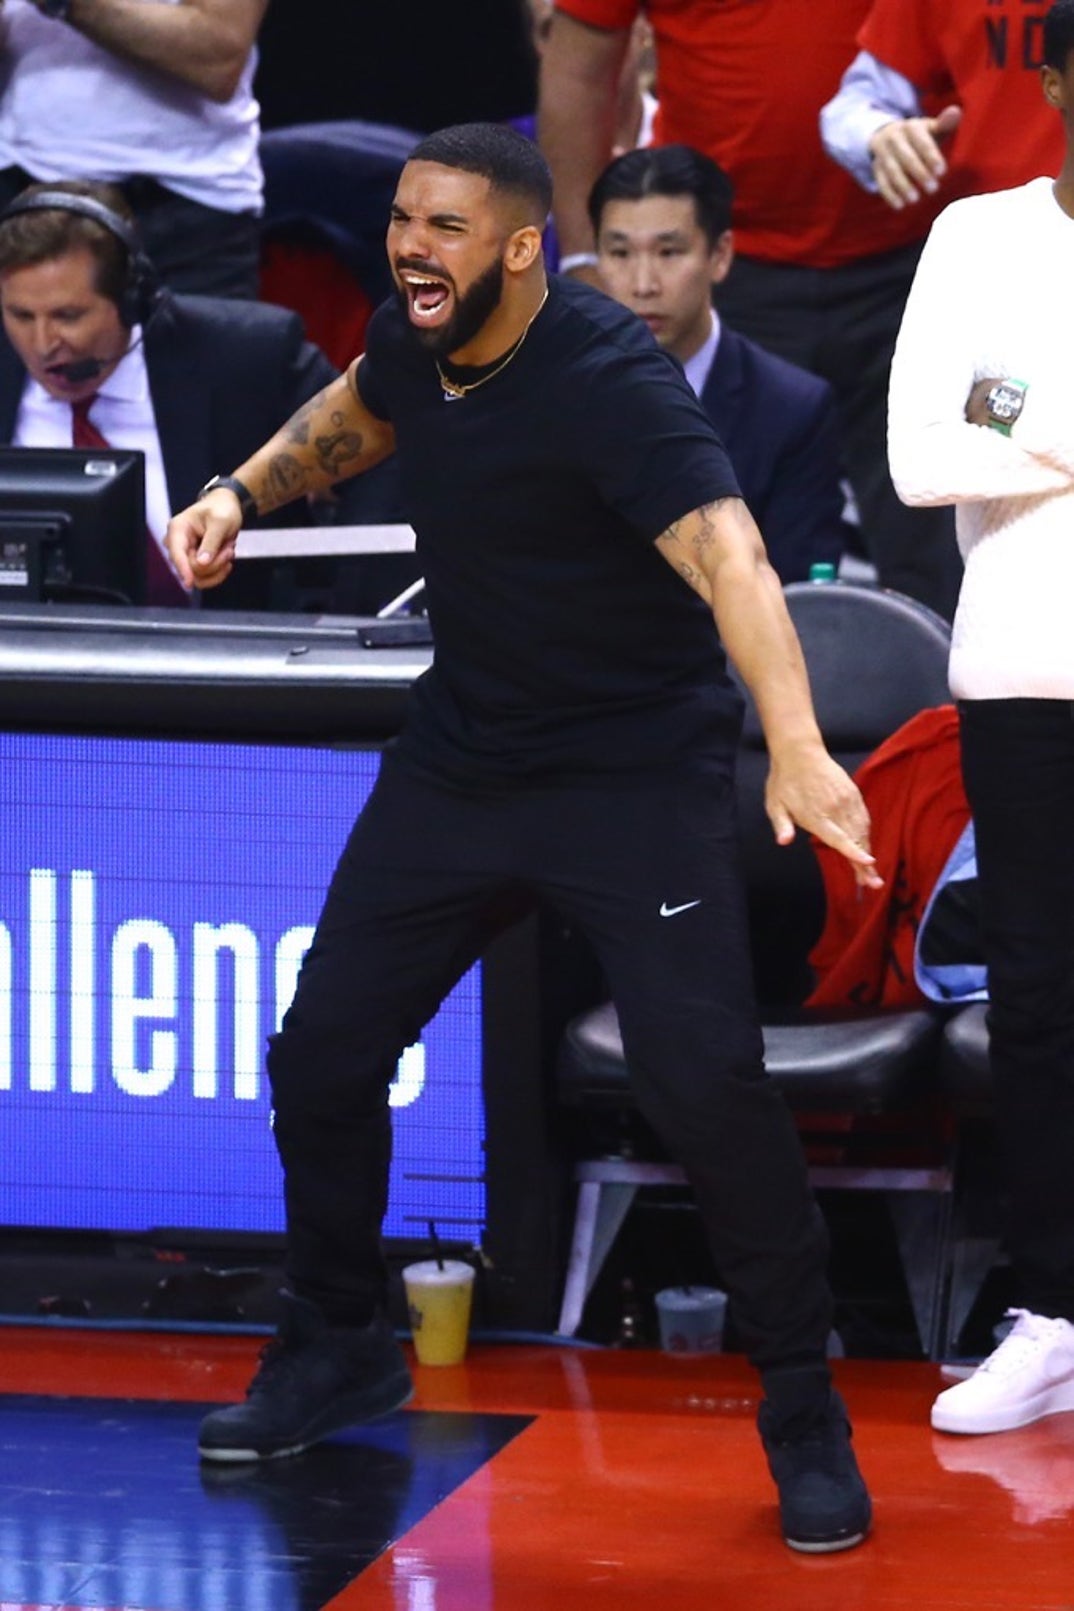 Drake busts out more courtside antics in NBA Finals 